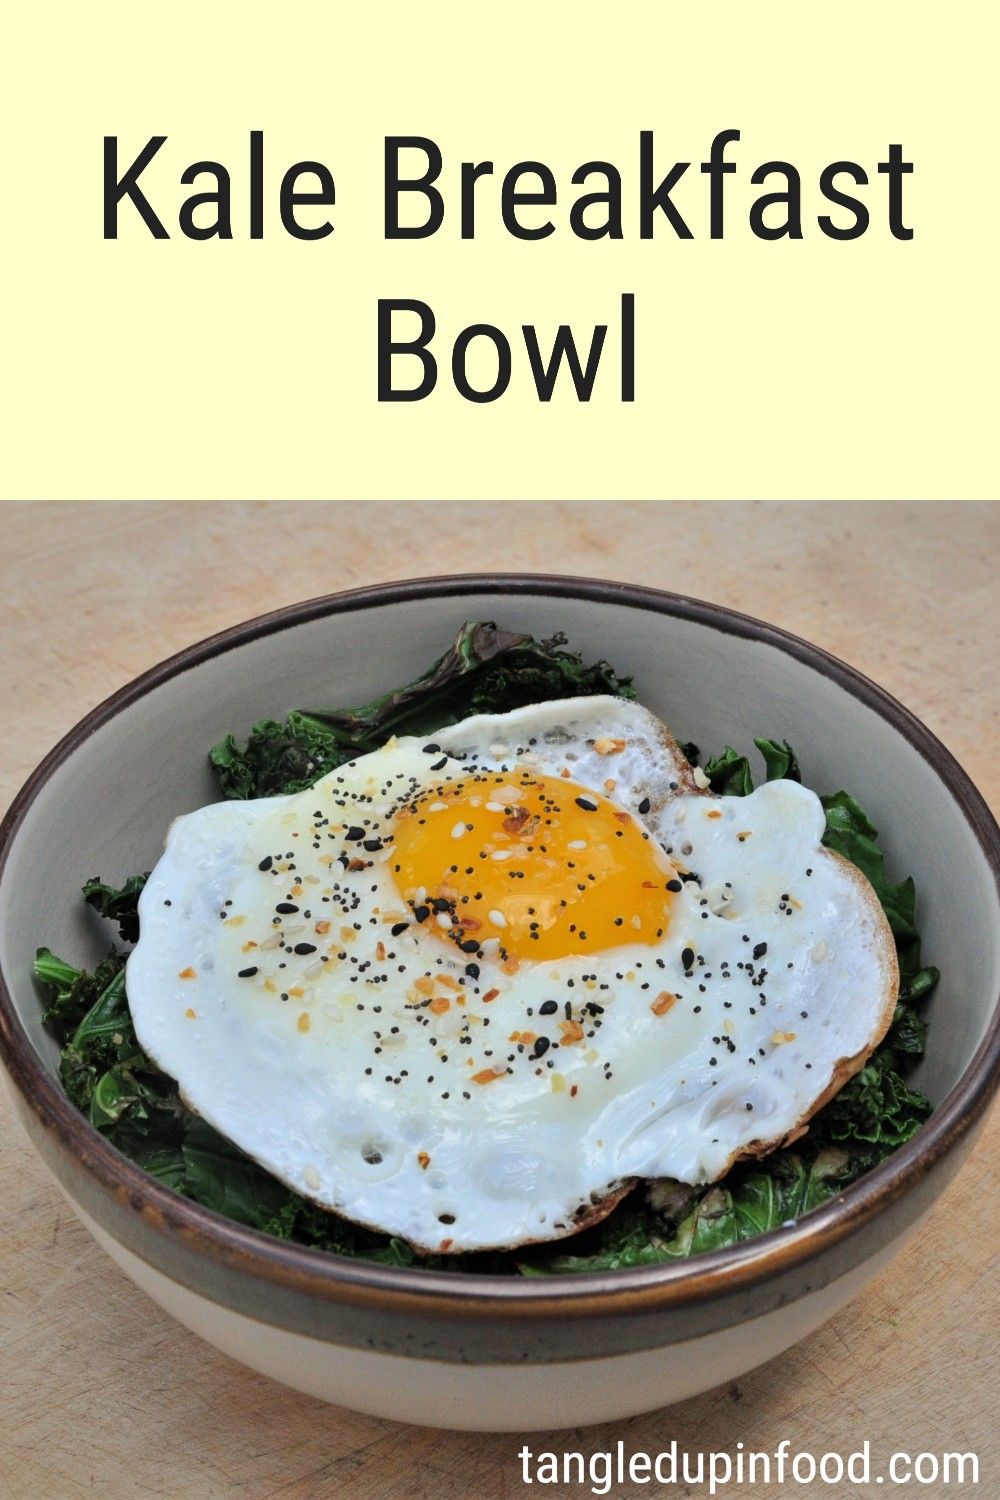 Bowl filled with sauteed kale and topped with a fried and text reading "Kale Breakfast Bowl"